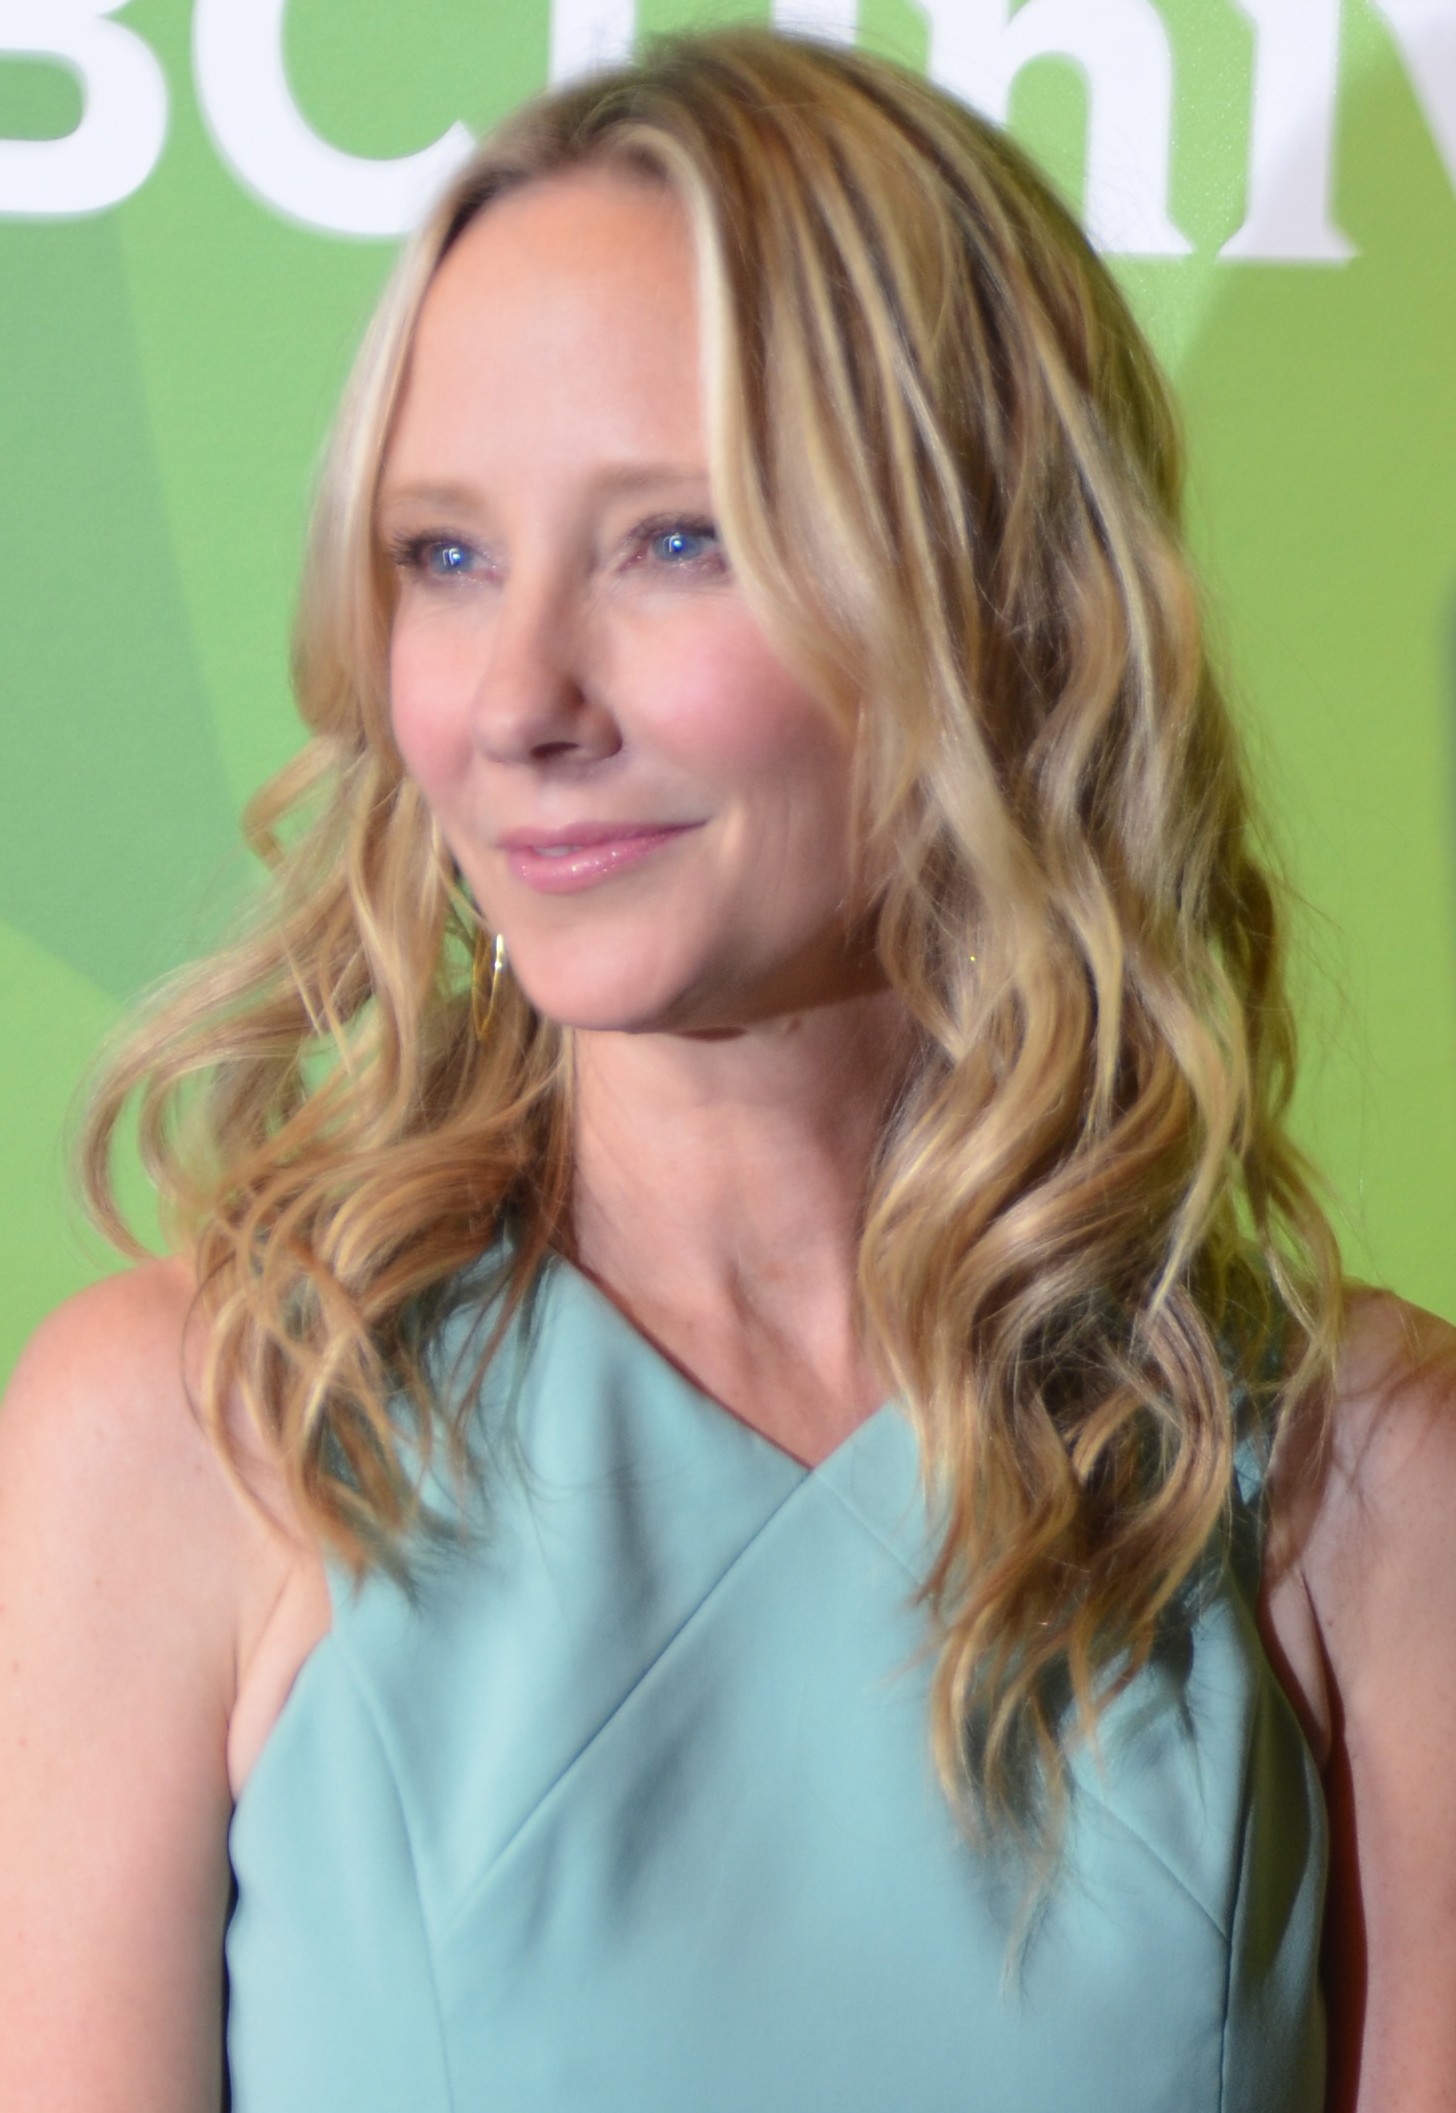 Hollywood actress Anne Heche in coma since fiery car crash- spokesperson 